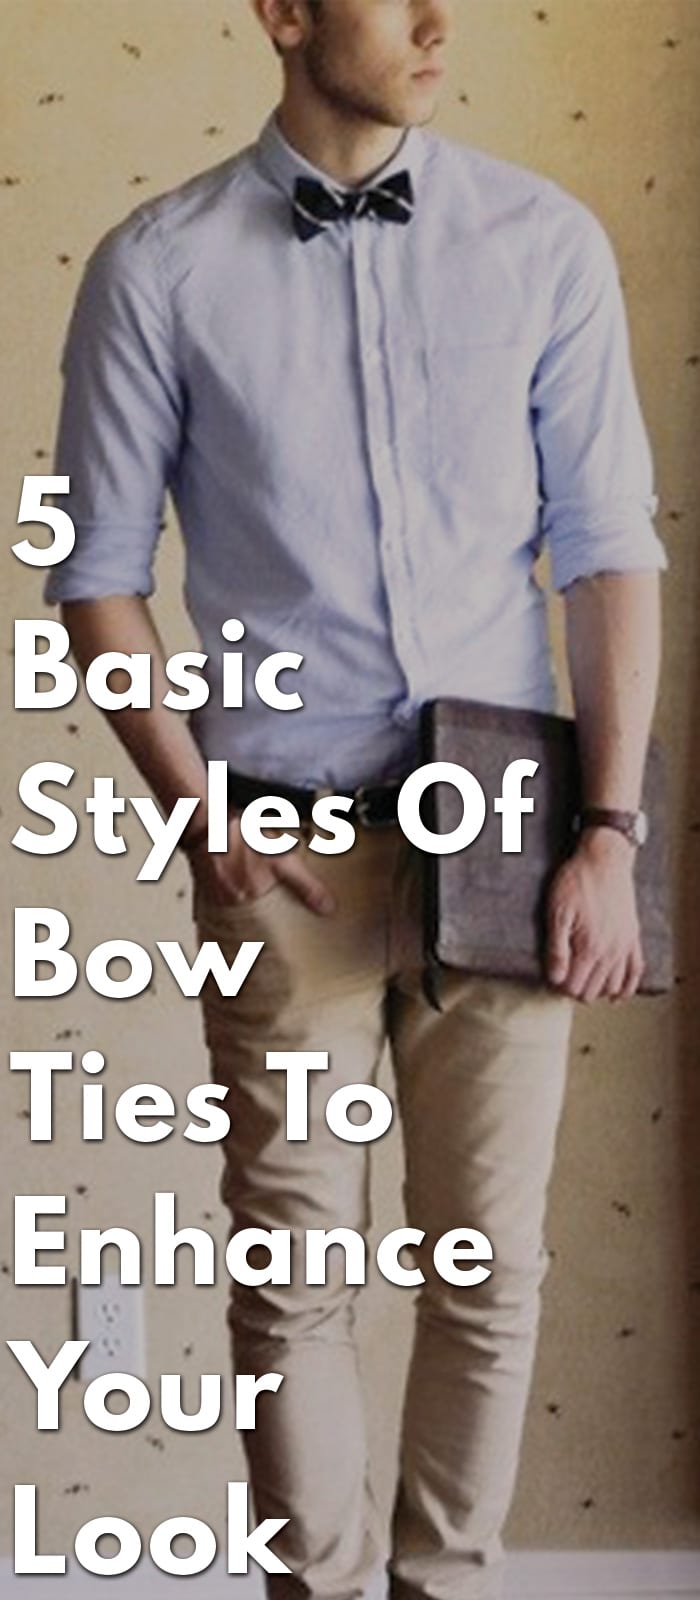 5-Basic-Styles-Of-Bow-Ties-To-Enhance-Your-Look